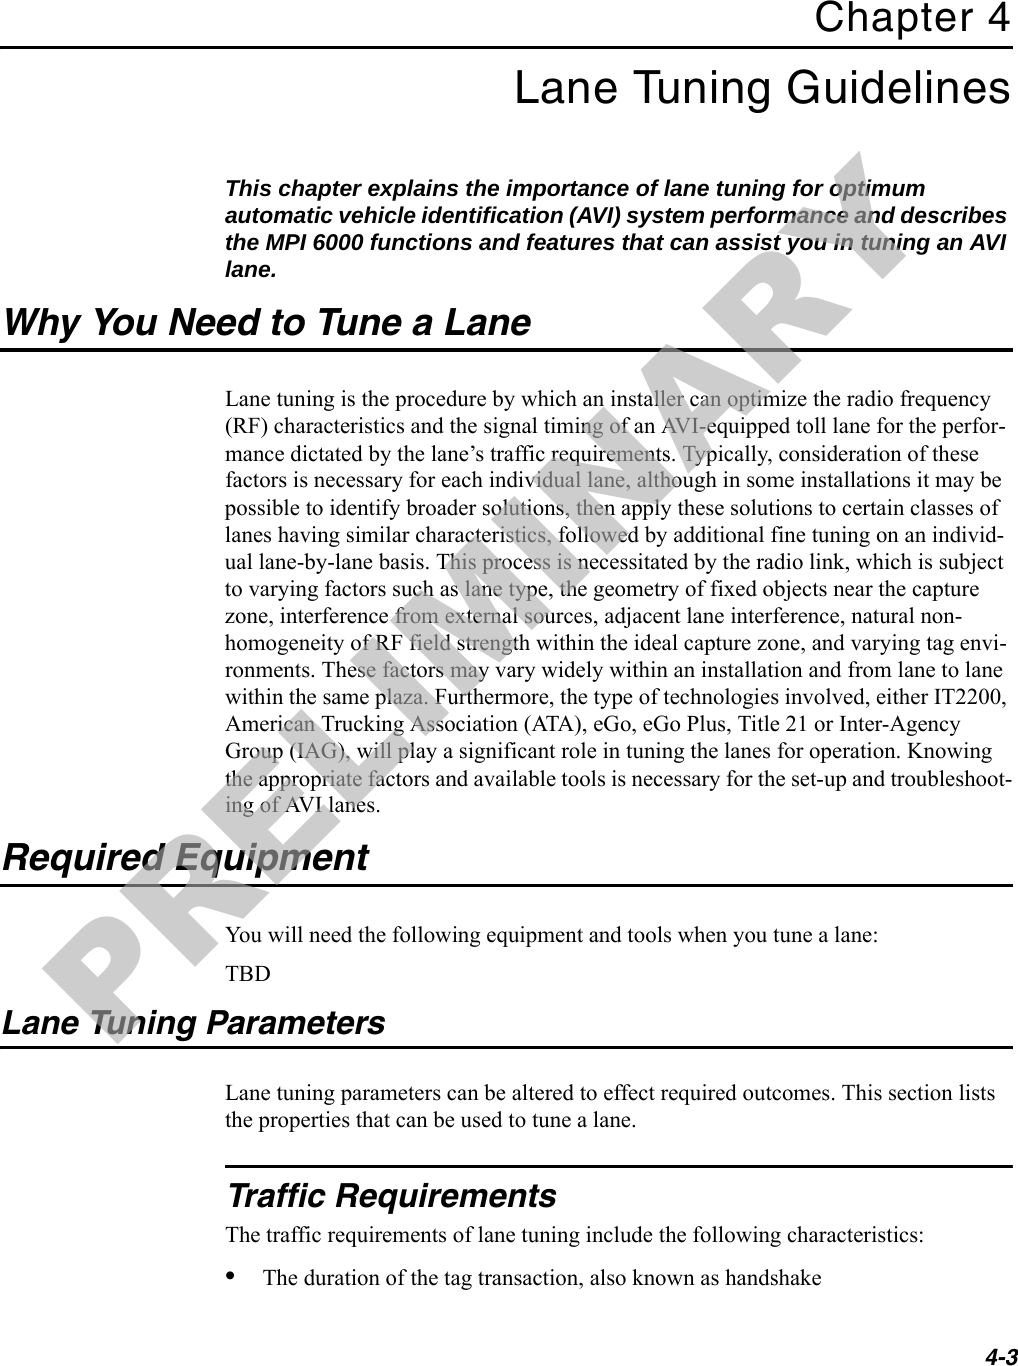 4-3Chapter 4Lane Tuning Guidelines This chapter explains the importance of lane tuning for optimum automatic vehicle identification (AVI) system performance and describes the MPI 6000 functions and features that can assist you in tuning an AVI lane.Why You Need to Tune a LaneLane tuning is the procedure by which an installer can optimize the radio frequency (RF) characteristics and the signal timing of an AVI-equipped toll lane for the perfor-mance dictated by the lane’s traffic requirements. Typically, consideration of these factors is necessary for each individual lane, although in some installations it may be possible to identify broader solutions, then apply these solutions to certain classes of lanes having similar characteristics, followed by additional fine tuning on an individ-ual lane-by-lane basis. This process is necessitated by the radio link, which is subject to varying factors such as lane type, the geometry of fixed objects near the capture zone, interference from external sources, adjacent lane interference, natural non-homogeneity of RF field strength within the ideal capture zone, and varying tag envi-ronments. These factors may vary widely within an installation and from lane to lane within the same plaza. Furthermore, the type of technologies involved, either IT2200, American Trucking Association (ATA), eGo, eGo Plus, Title 21 or Inter-Agency Group (IAG), will play a significant role in tuning the lanes for operation. Knowing the appropriate factors and available tools is necessary for the set-up and troubleshoot-ing of AVI lanes.Required EquipmentYou will need the following equipment and tools when you tune a lane:TBDLane Tuning ParametersLane tuning parameters can be altered to effect required outcomes. This section lists the properties that can be used to tune a lane.Traffic RequirementsThe traffic requirements of lane tuning include the following characteristics:•The duration of the tag transaction, also known as handshakePRELIMINARY